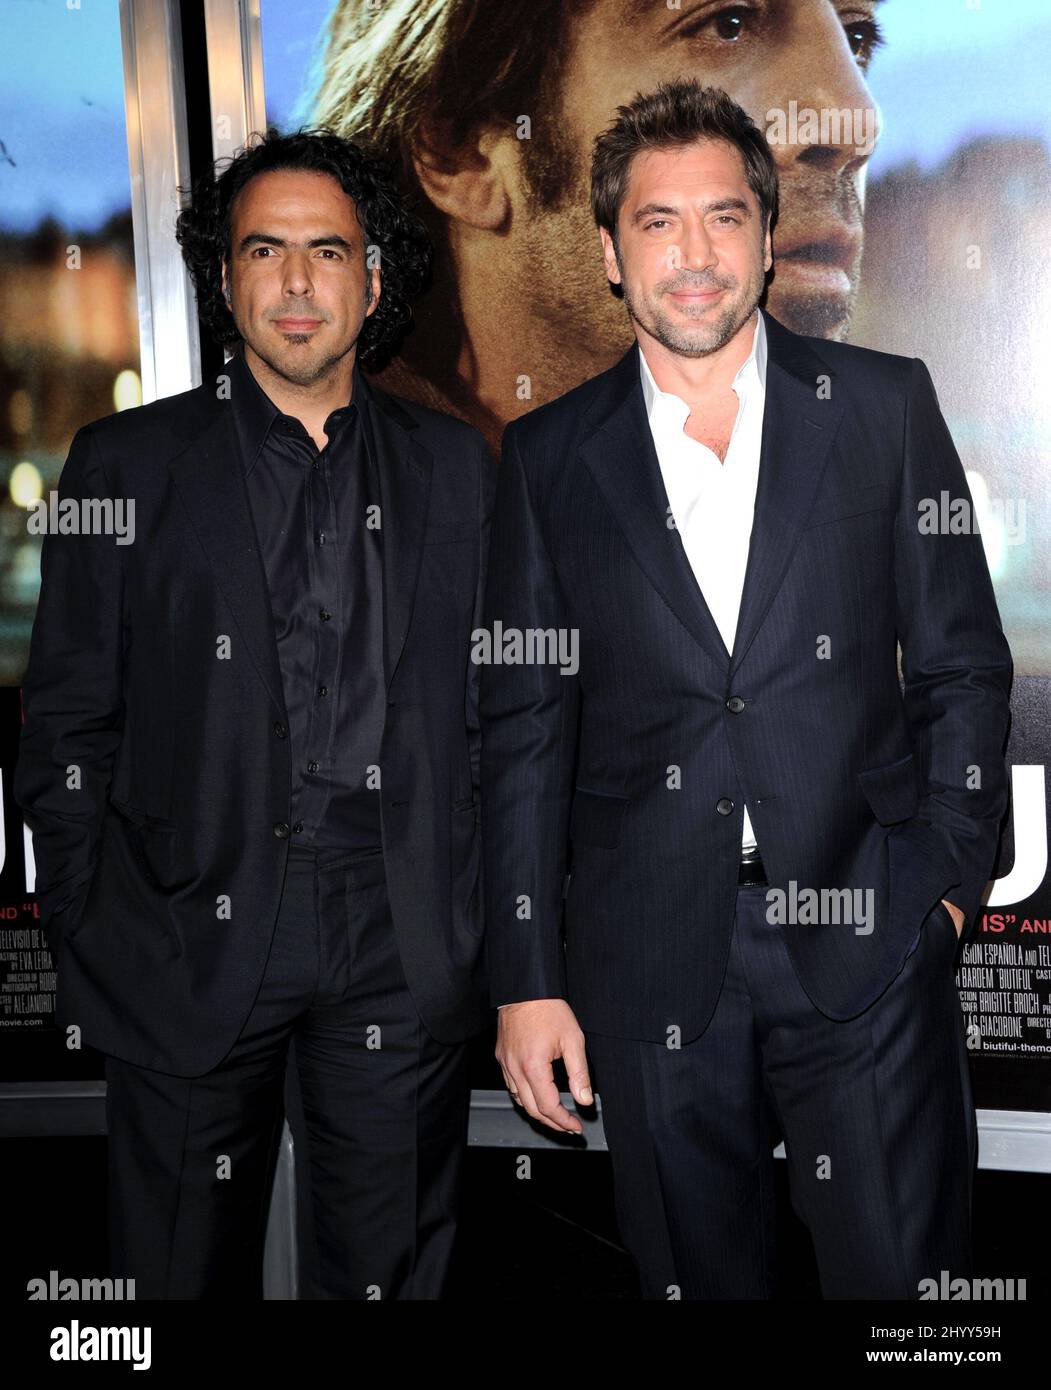 Alejandro Gonzalez Inarritu and Javier Bardem at the 'Biutiful' Premiere, held at the DGA Theater, Los Angeles. Stock Photo